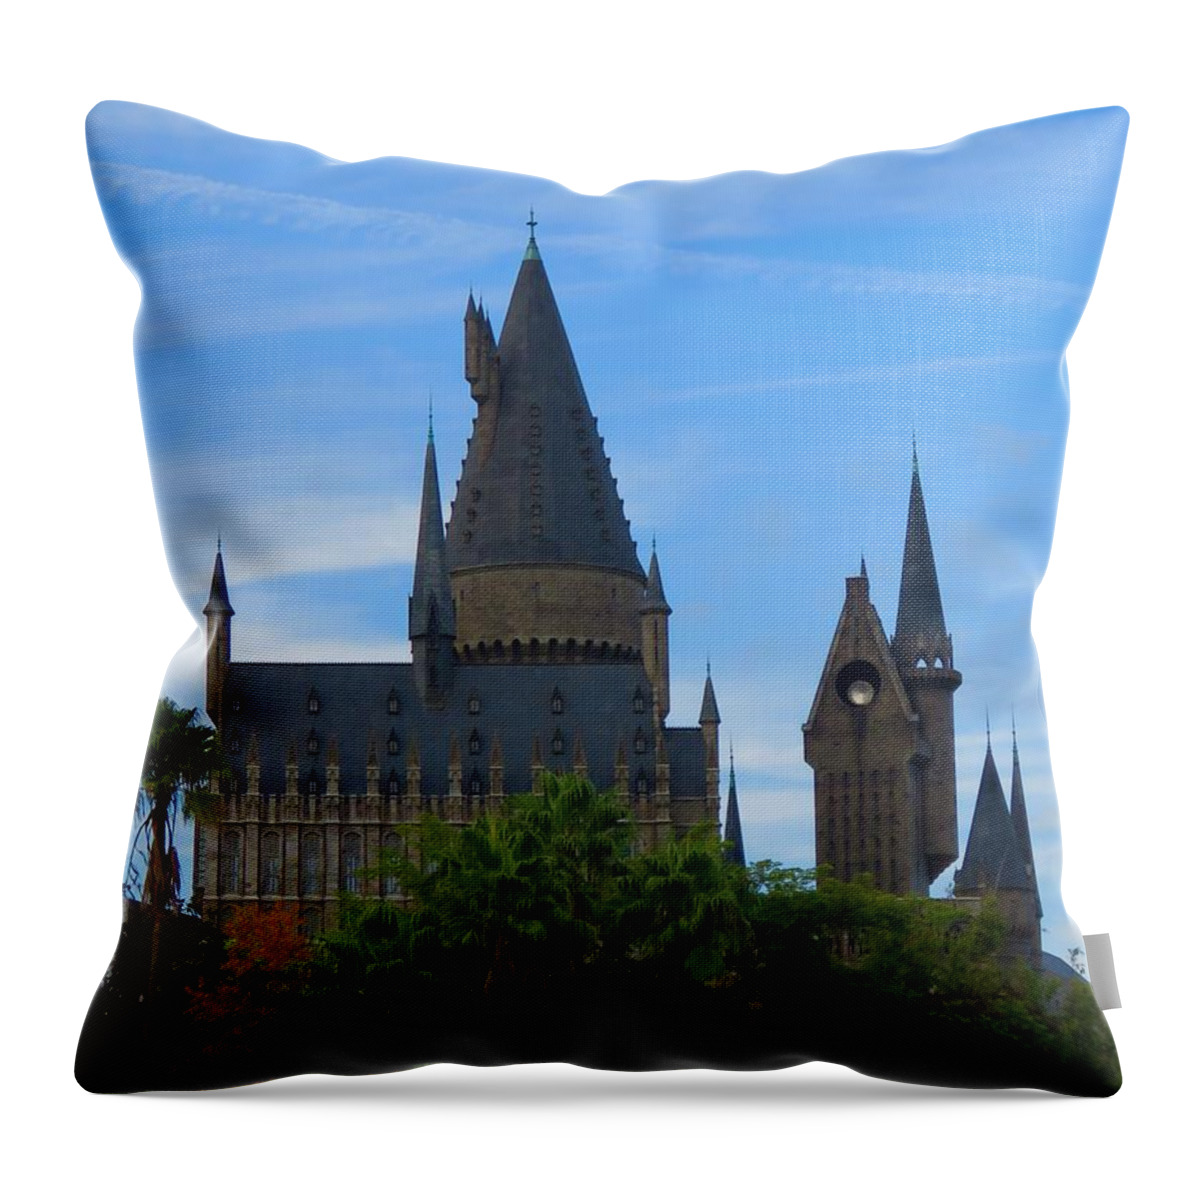 Kathy Long Throw Pillow featuring the photograph Hogwarts Castle with Towers by Kathy Long